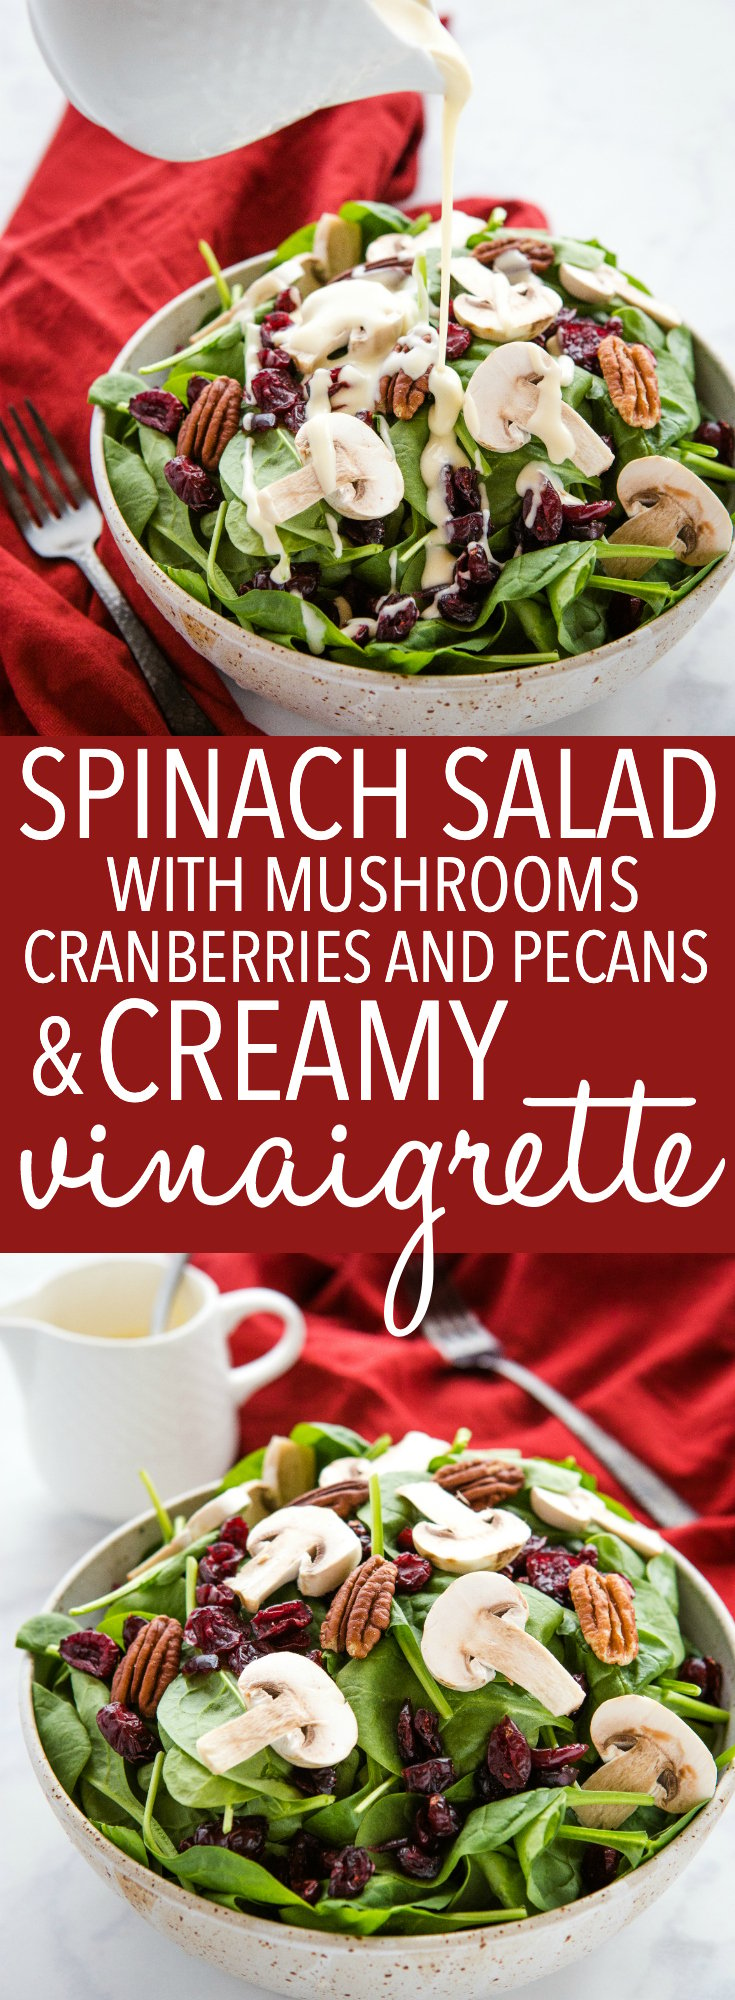 This Spinach Salad with Creamy Vinaigrette is a delicious side dish packed with healthy greens, mushrooms, sweet dried cranberries and pecans! Under 90 calories per serving! Recipe from thebusybaker.ca! #salad #spinach #healthy #vinaigrette #homemade #sidedish #thanksgiving #summer #holiday #mushrooms #pecans via @busybakerblog